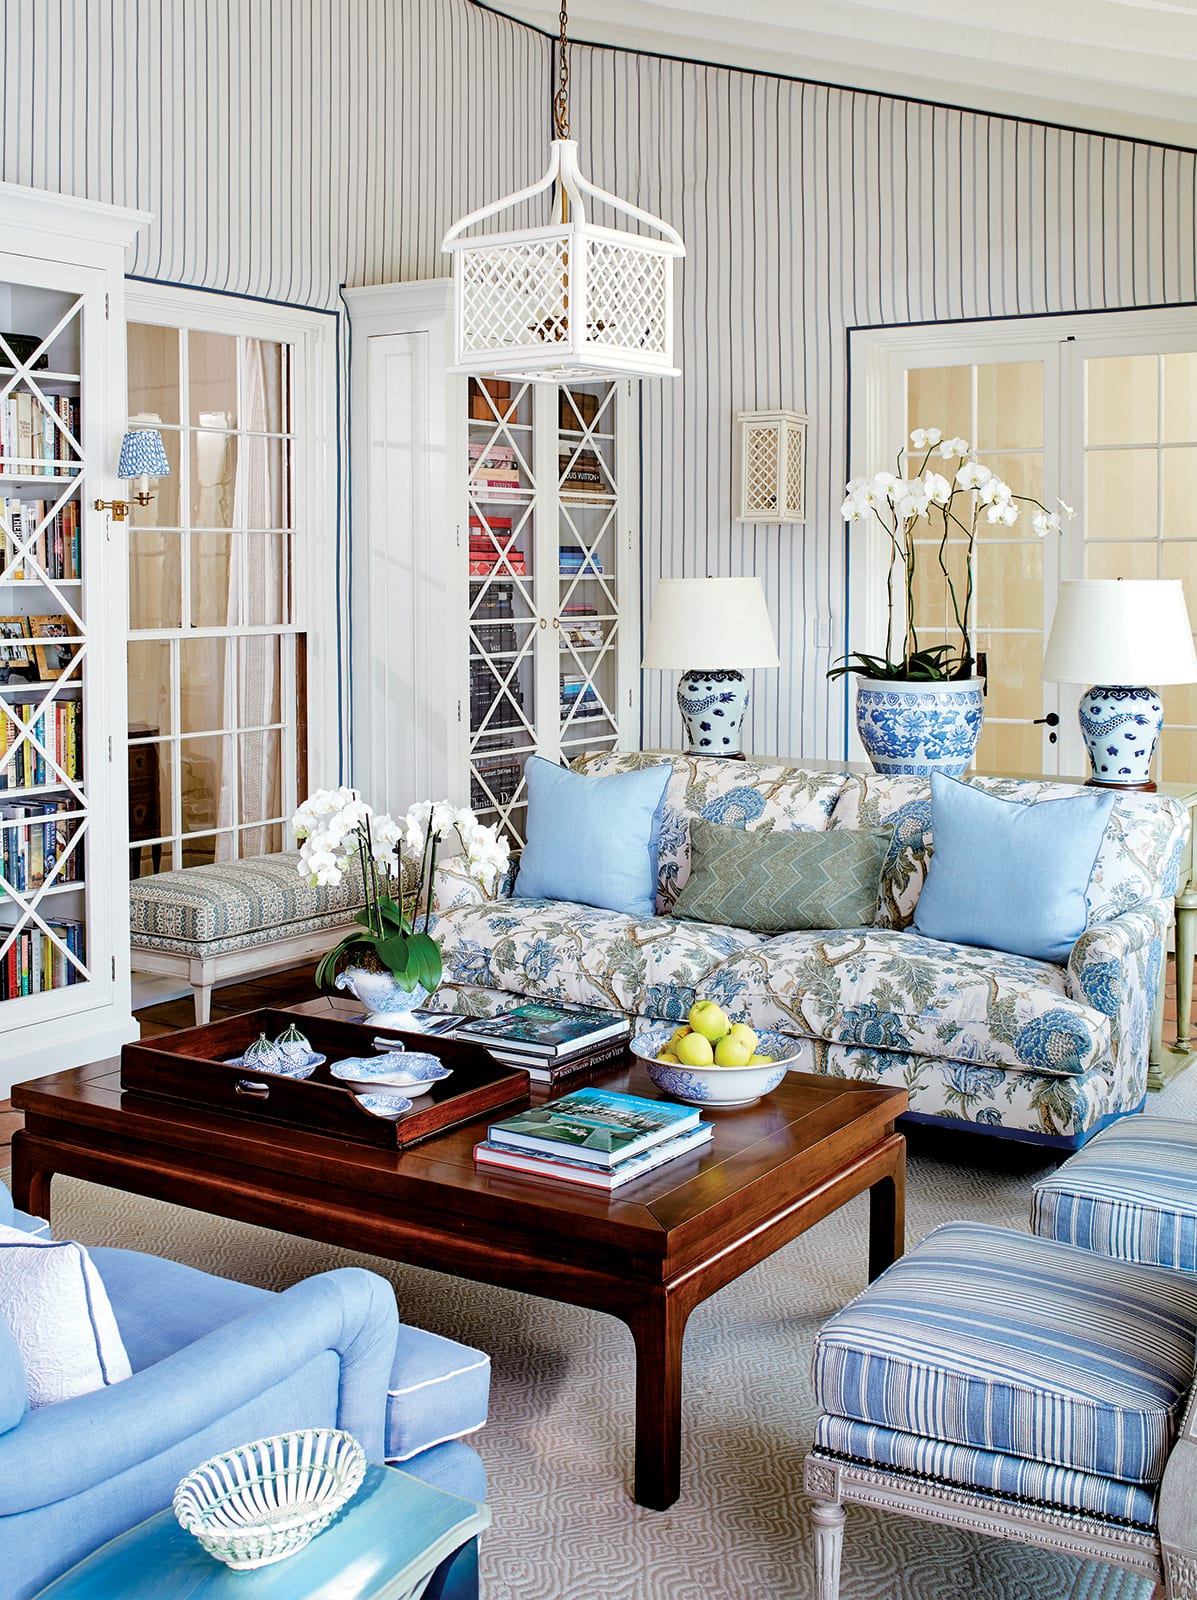 Montecito house tour Mark D. Sikes living room in blue and white